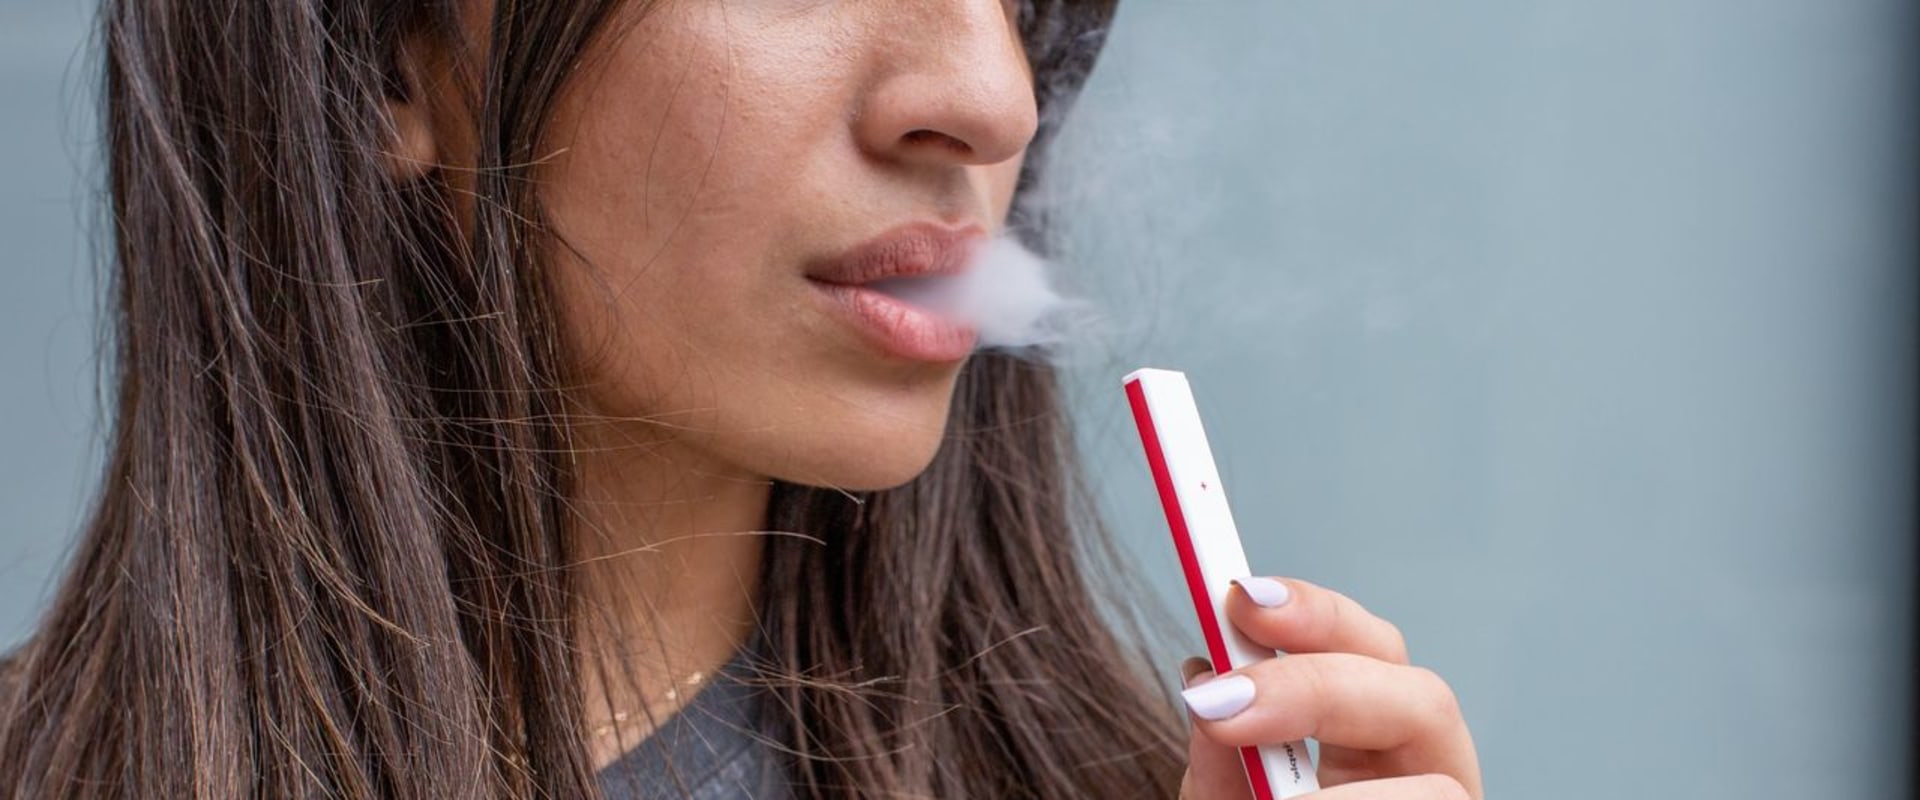 Is inhale health bad for the lungs?